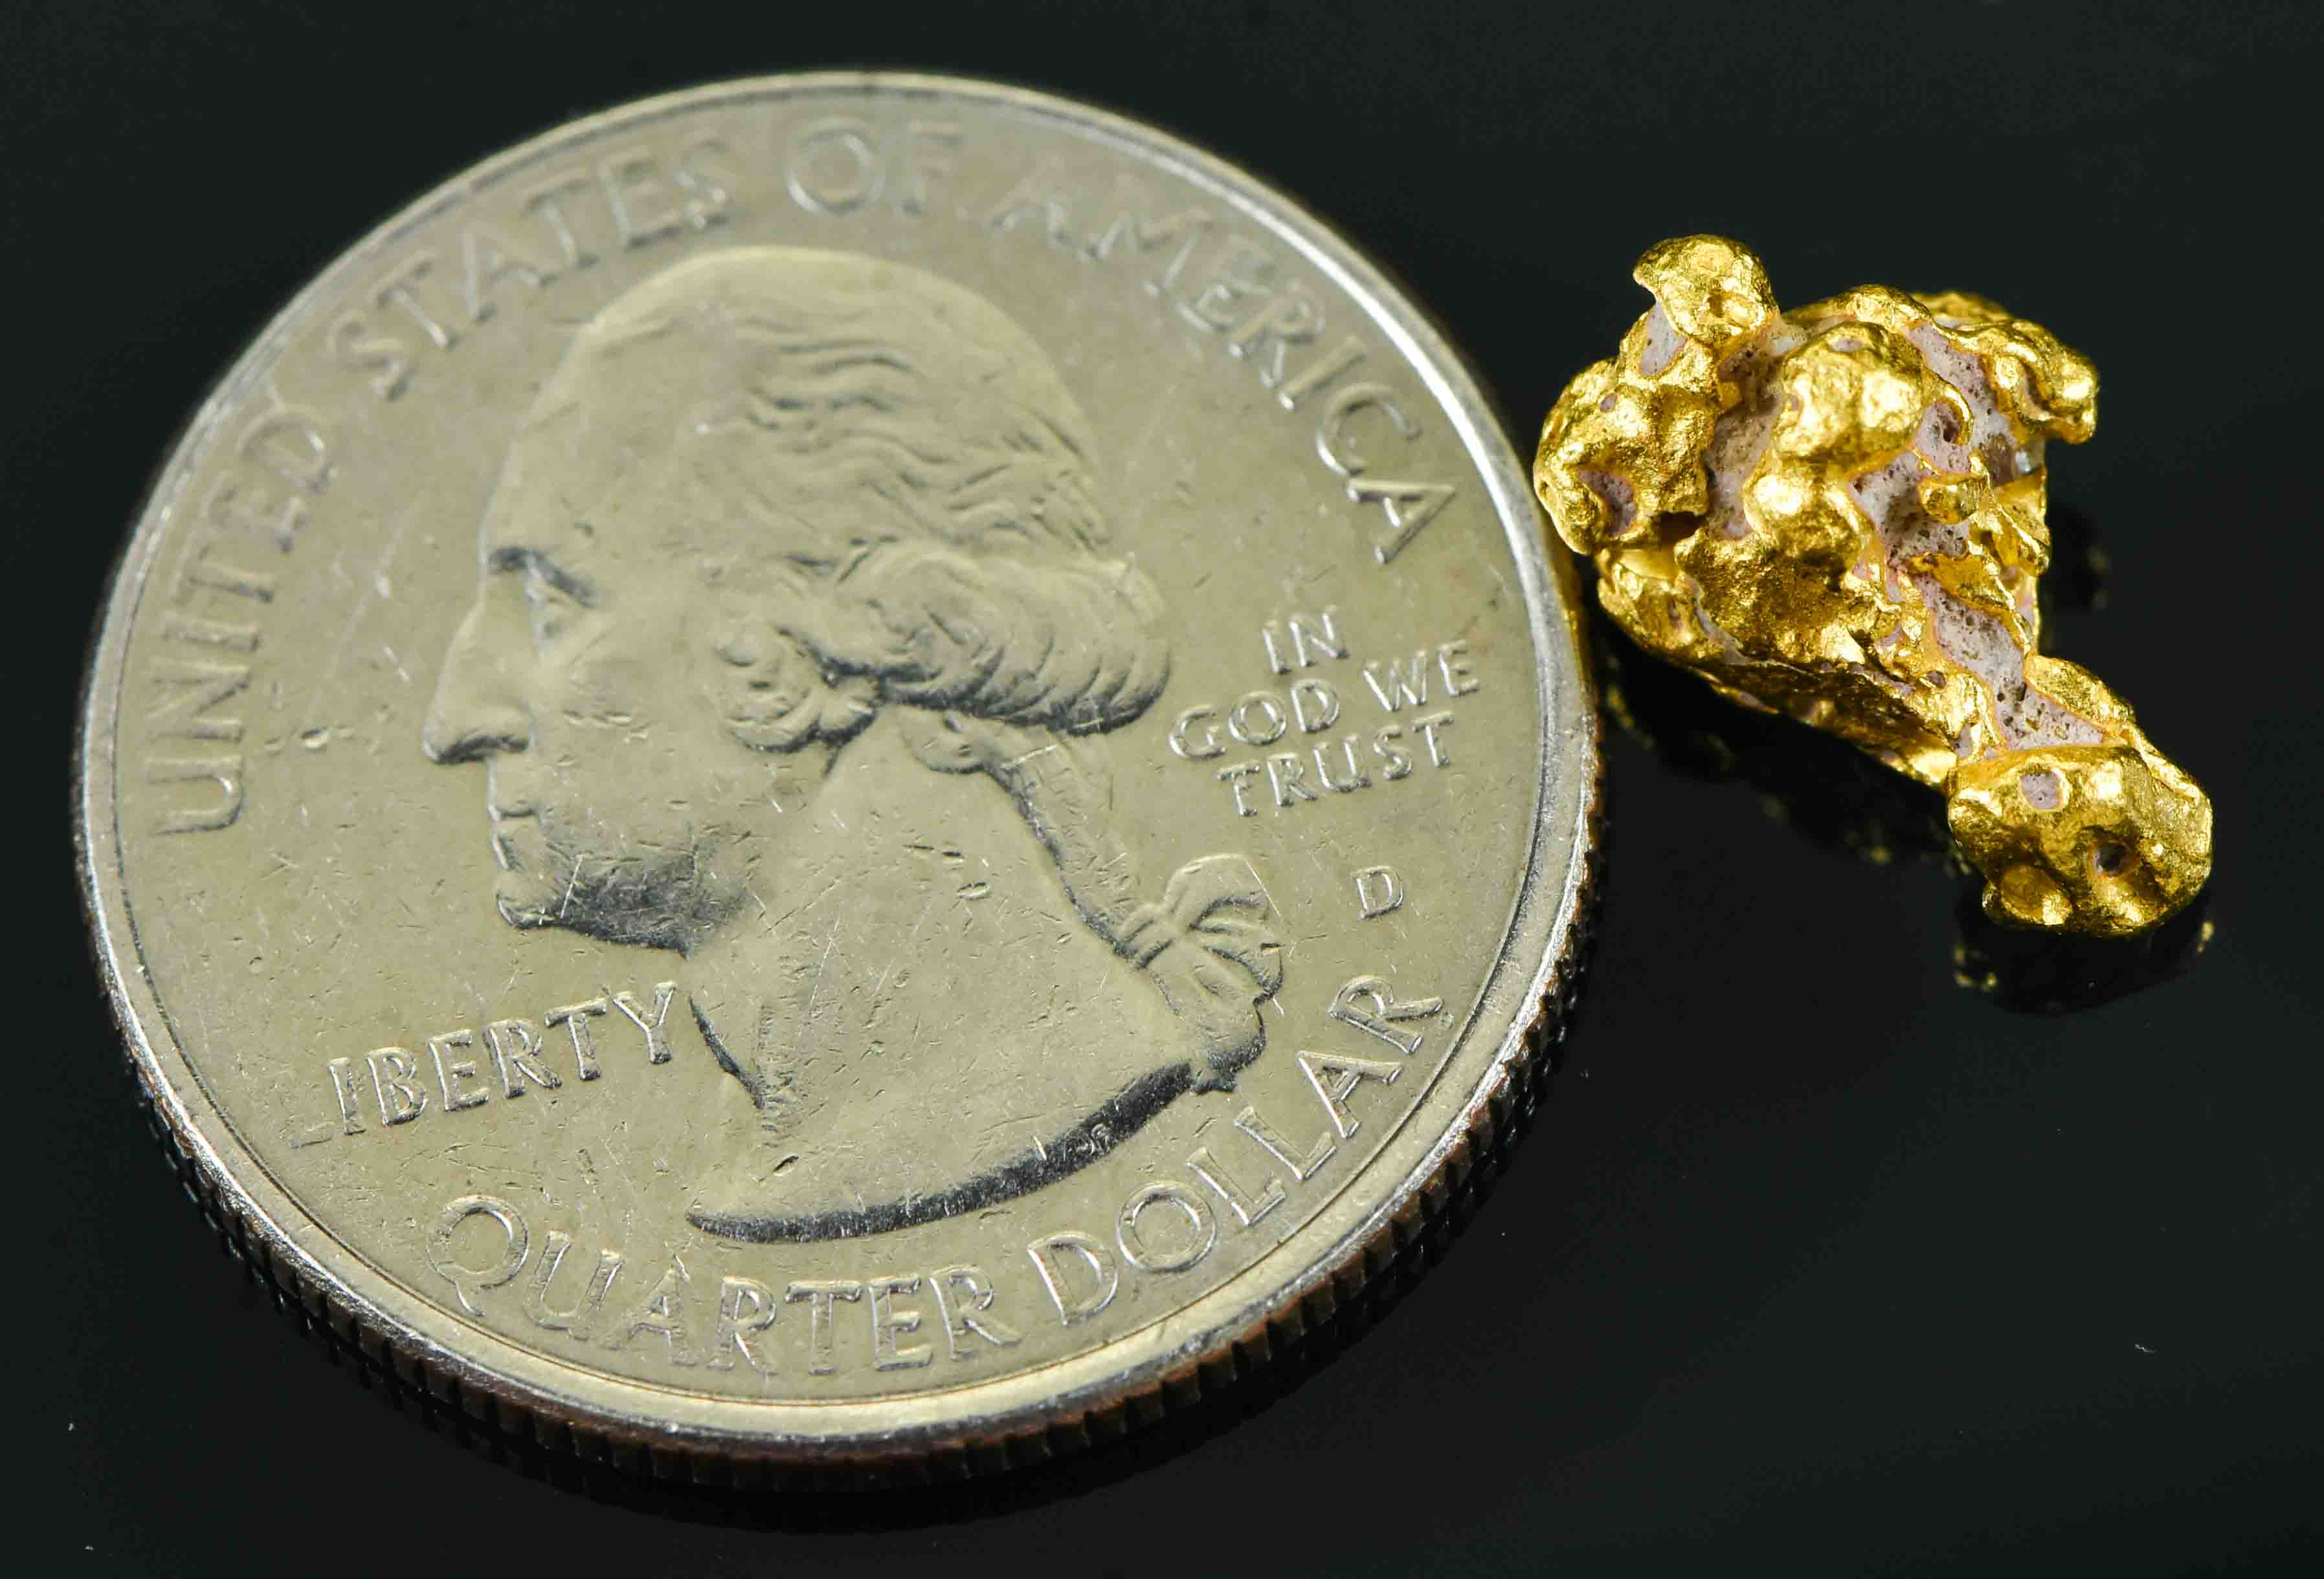 #25 Australian Natural Gold Nugget With Quartz Weighs 2.38 Grams.